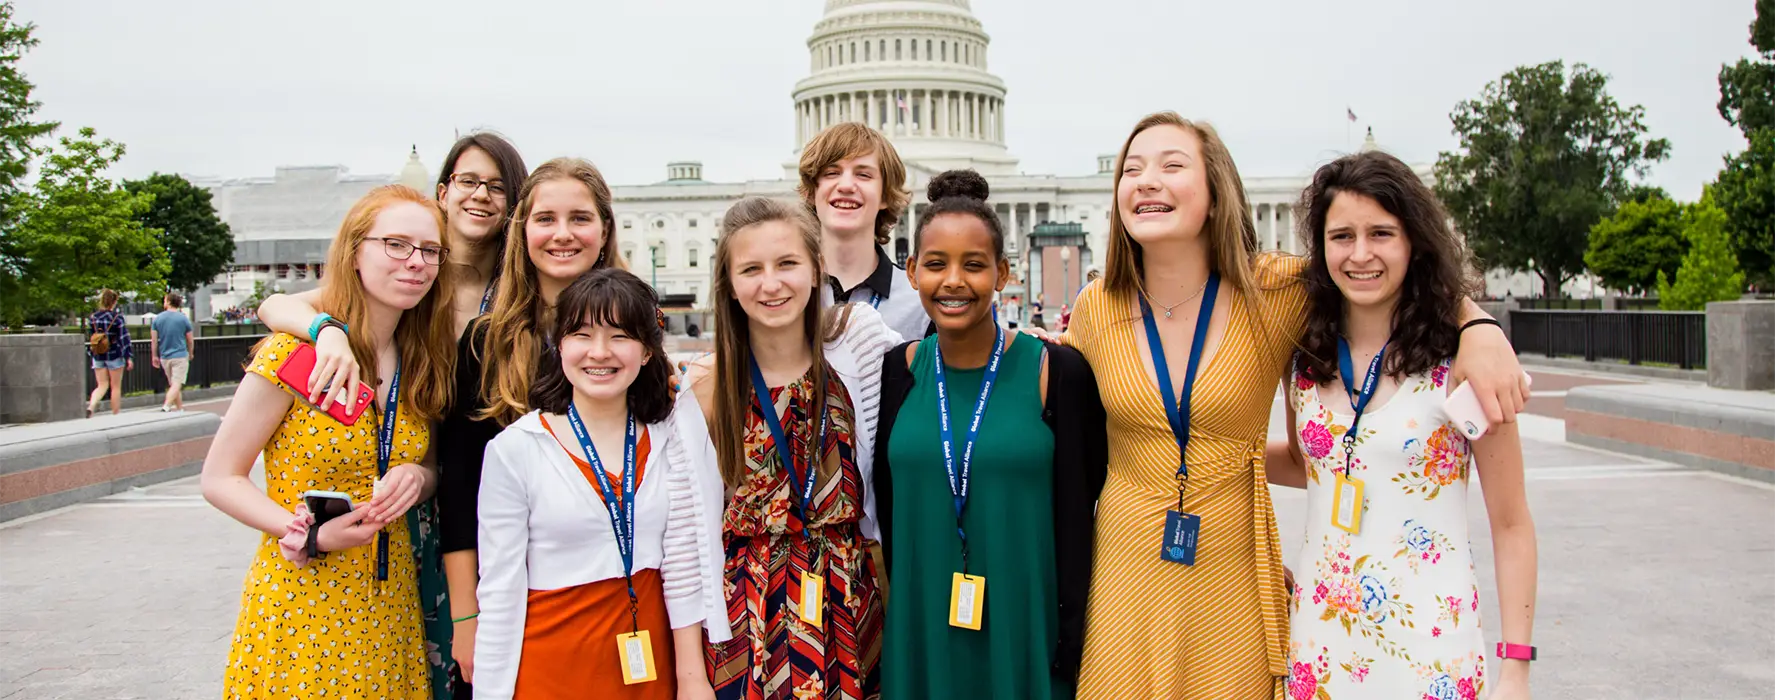 A group of 9 students posing for a photo in front of the US Capitol.